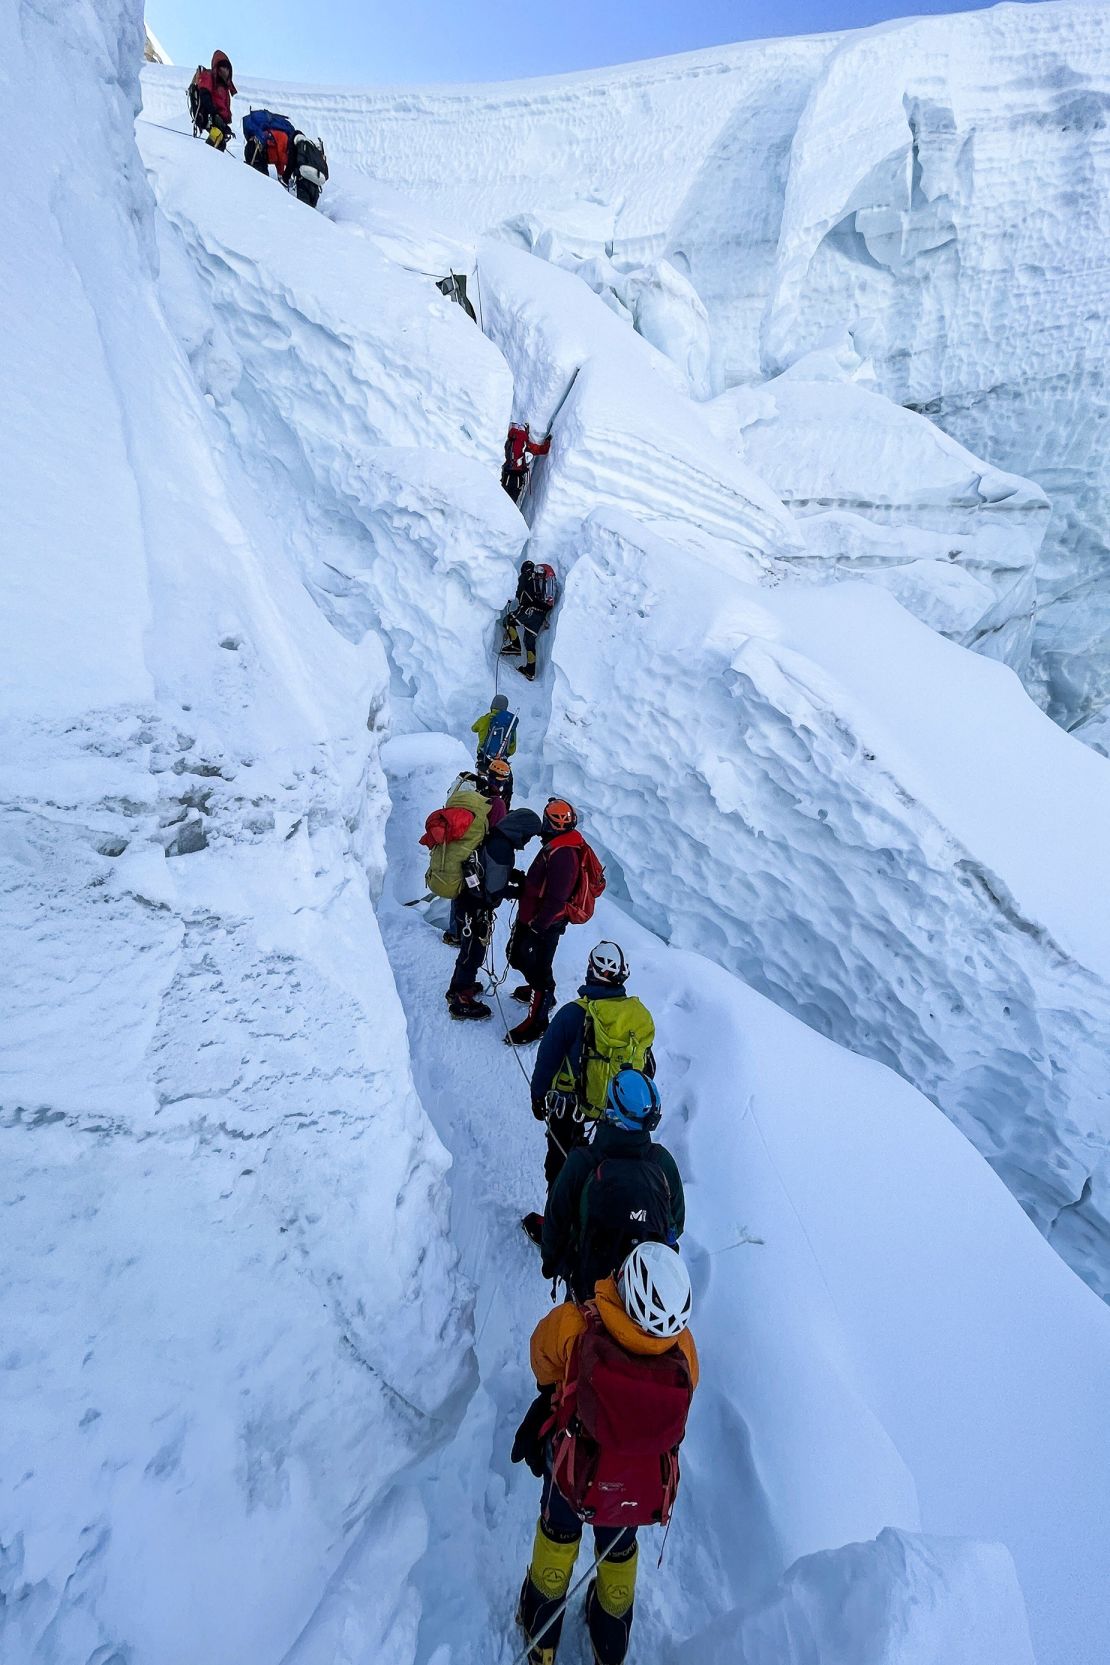 Mountaineers climbing during their ascend to summit Mount Everest on May 7, 2021.